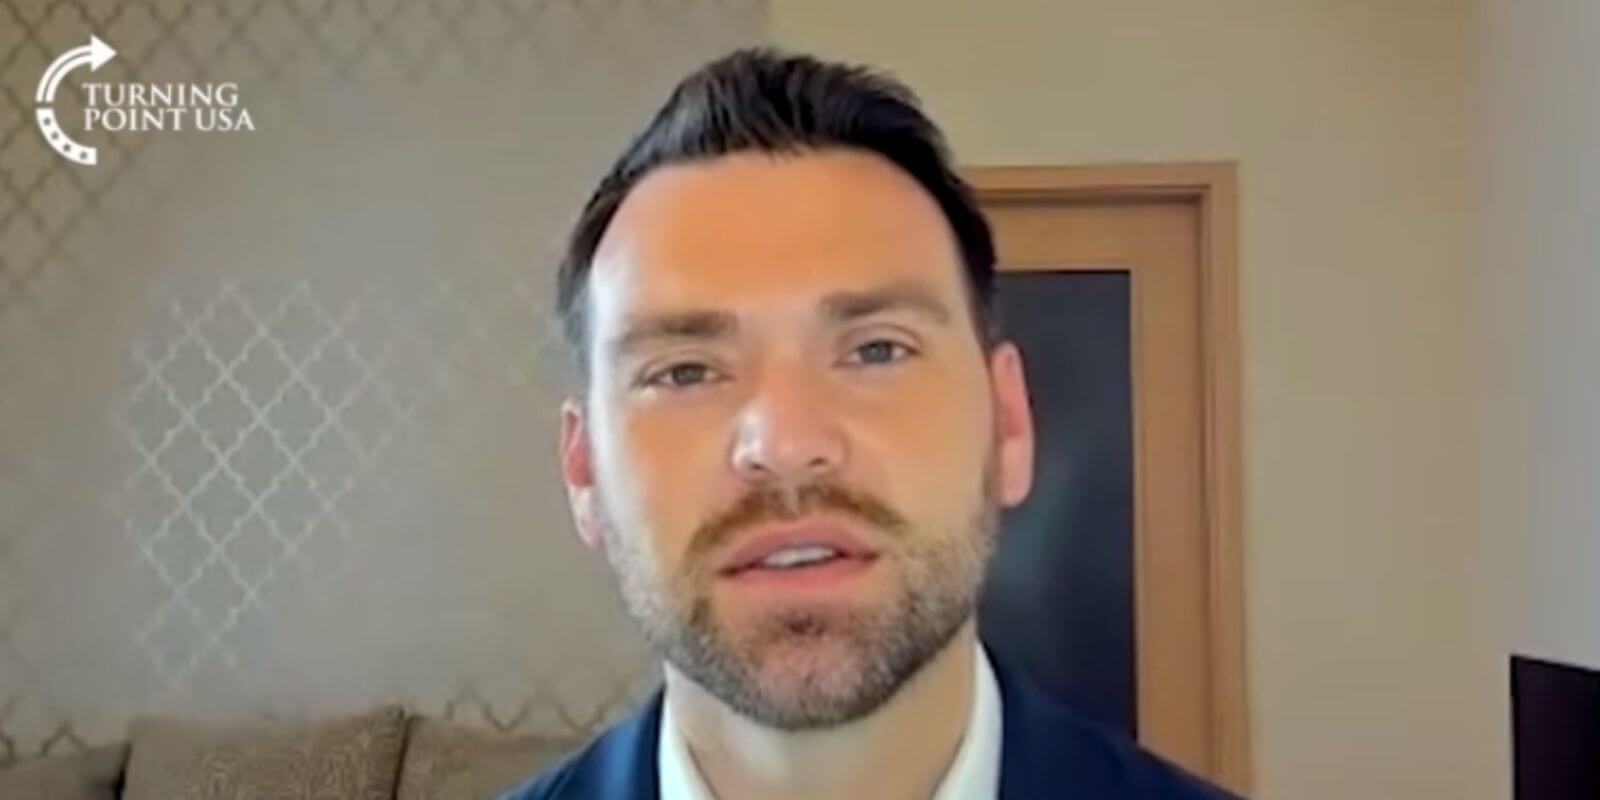 WATCH: Jack Posobiec analyzes the demise of the Ministry of Truth